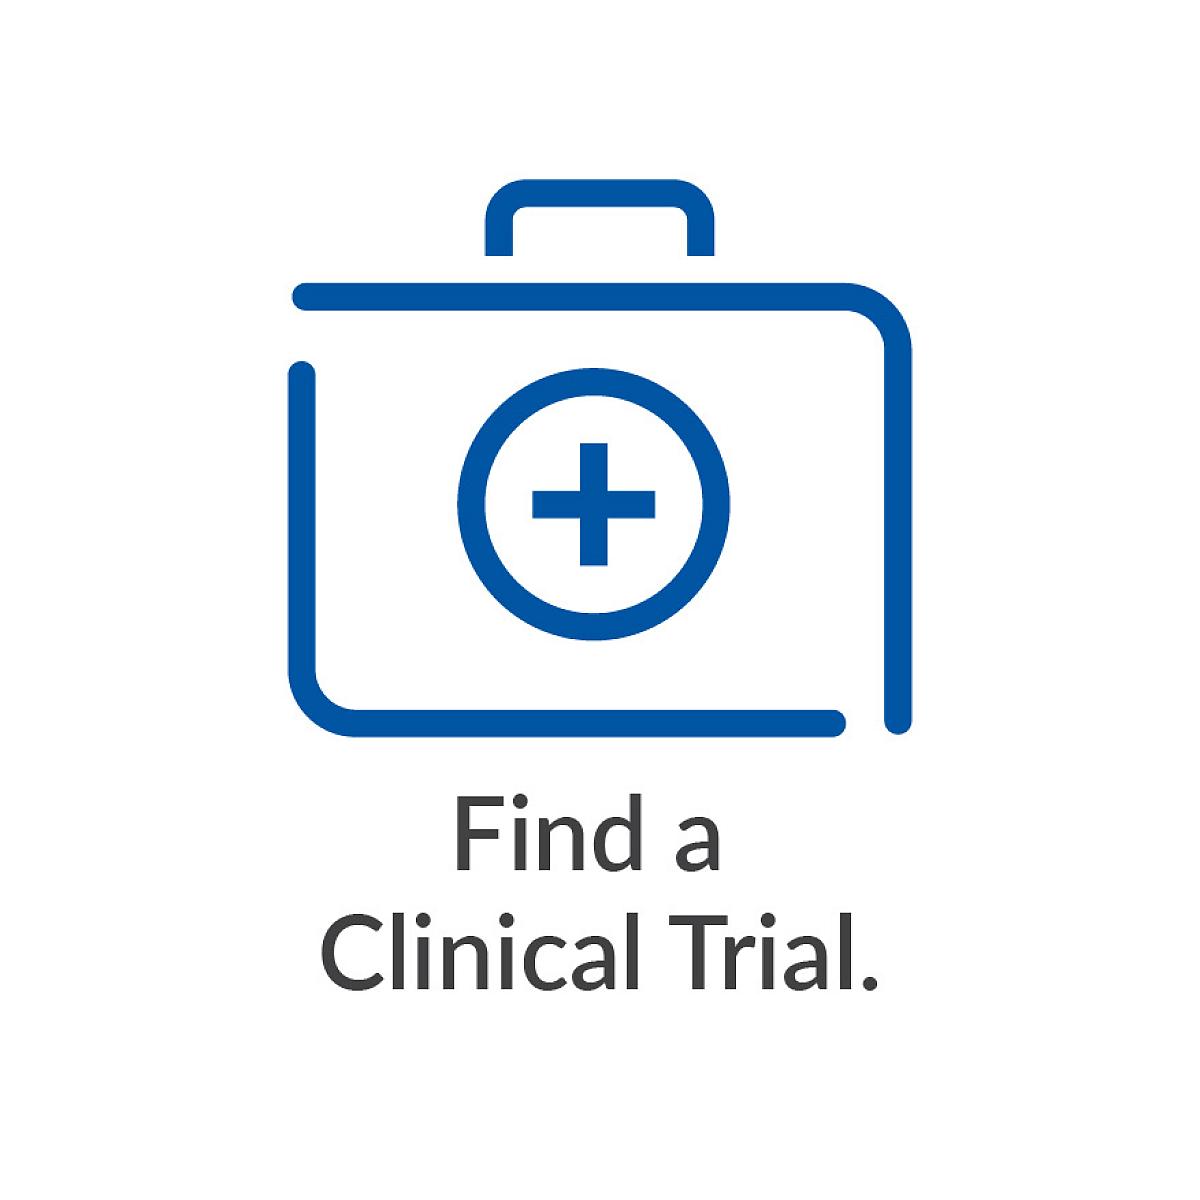 Find a Clinical Trial.